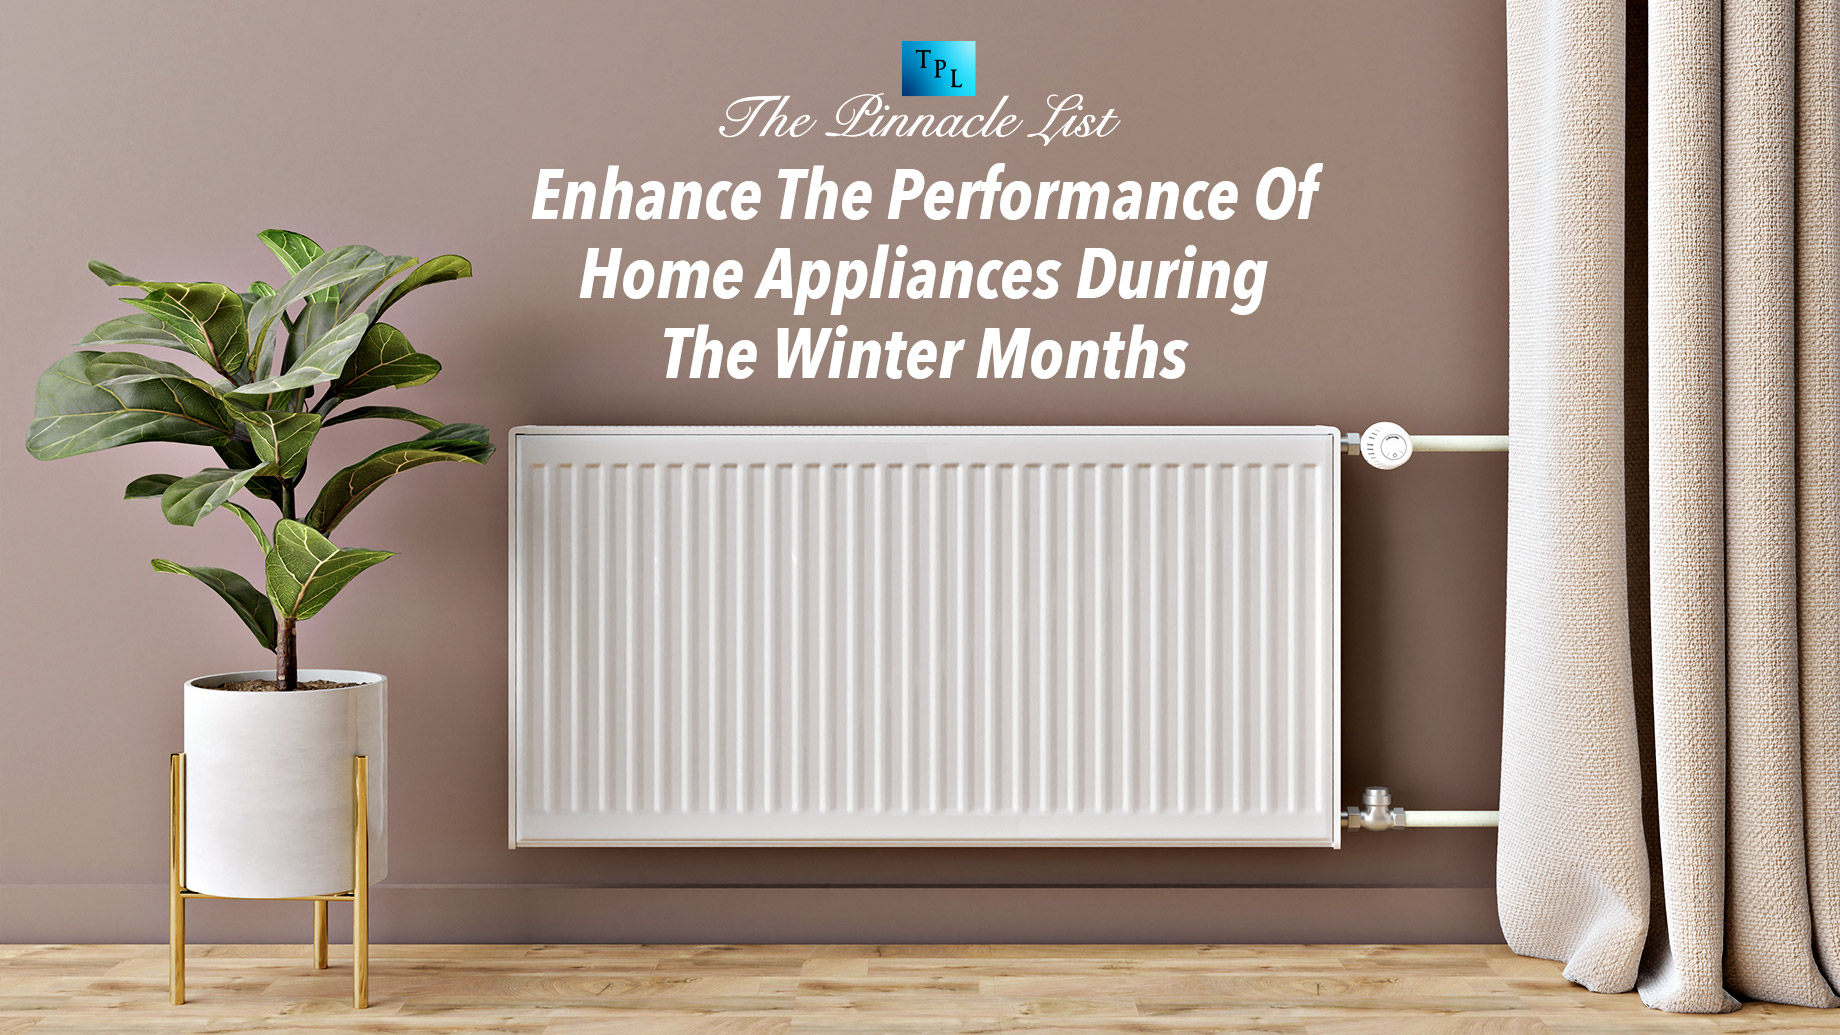 Enhance The Performance Of Home Appliances During The Winter Months